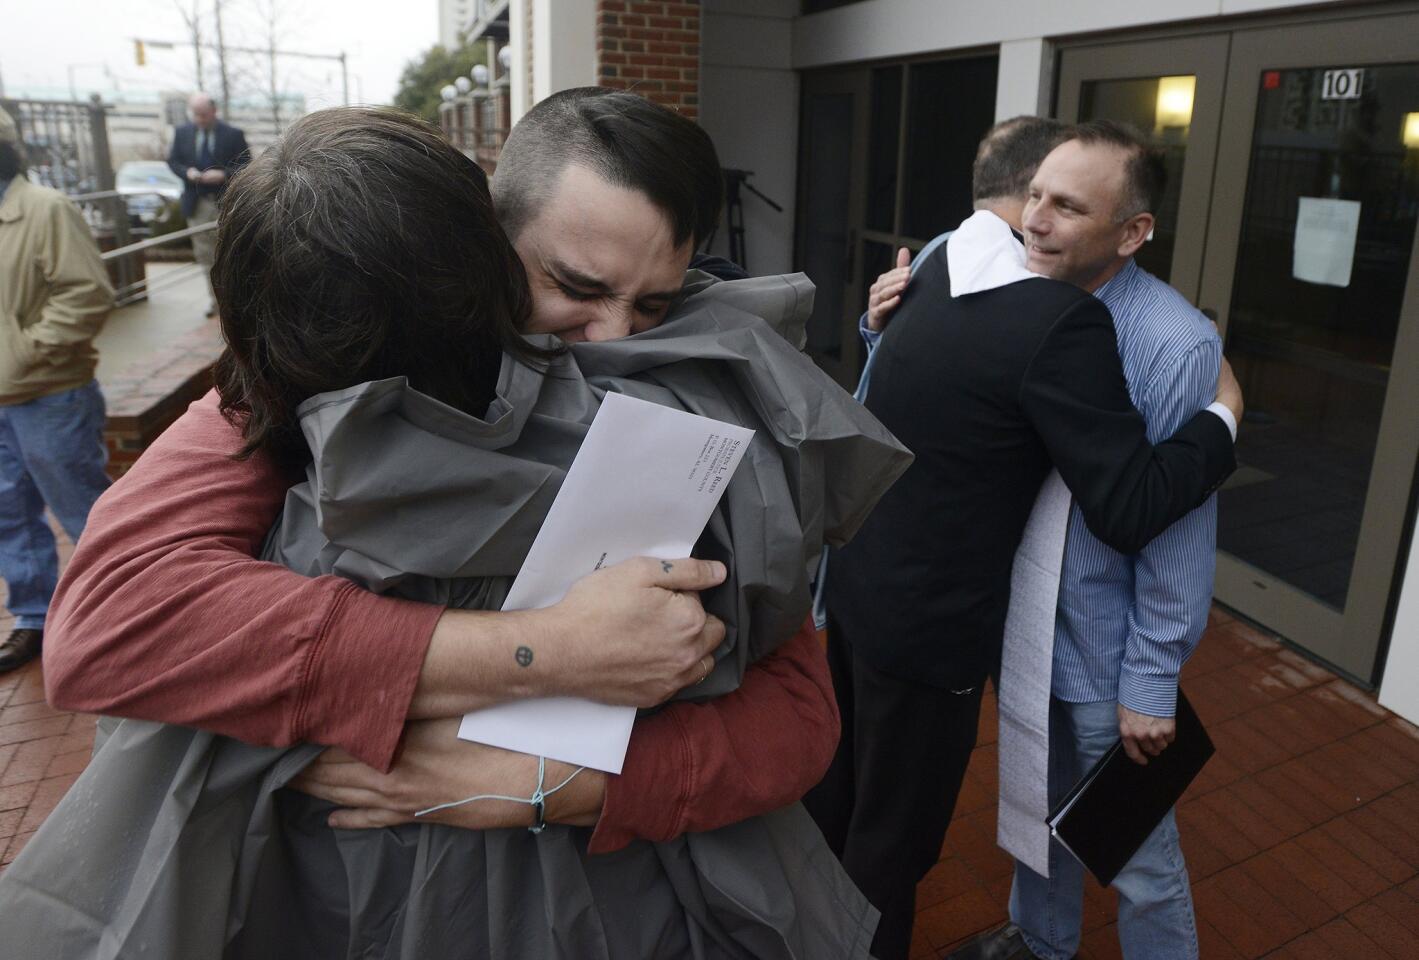 Justin Morgan, left, and Glenn Cannon, right, hug supporters after getting their marriage license in Montgomery, Ala.